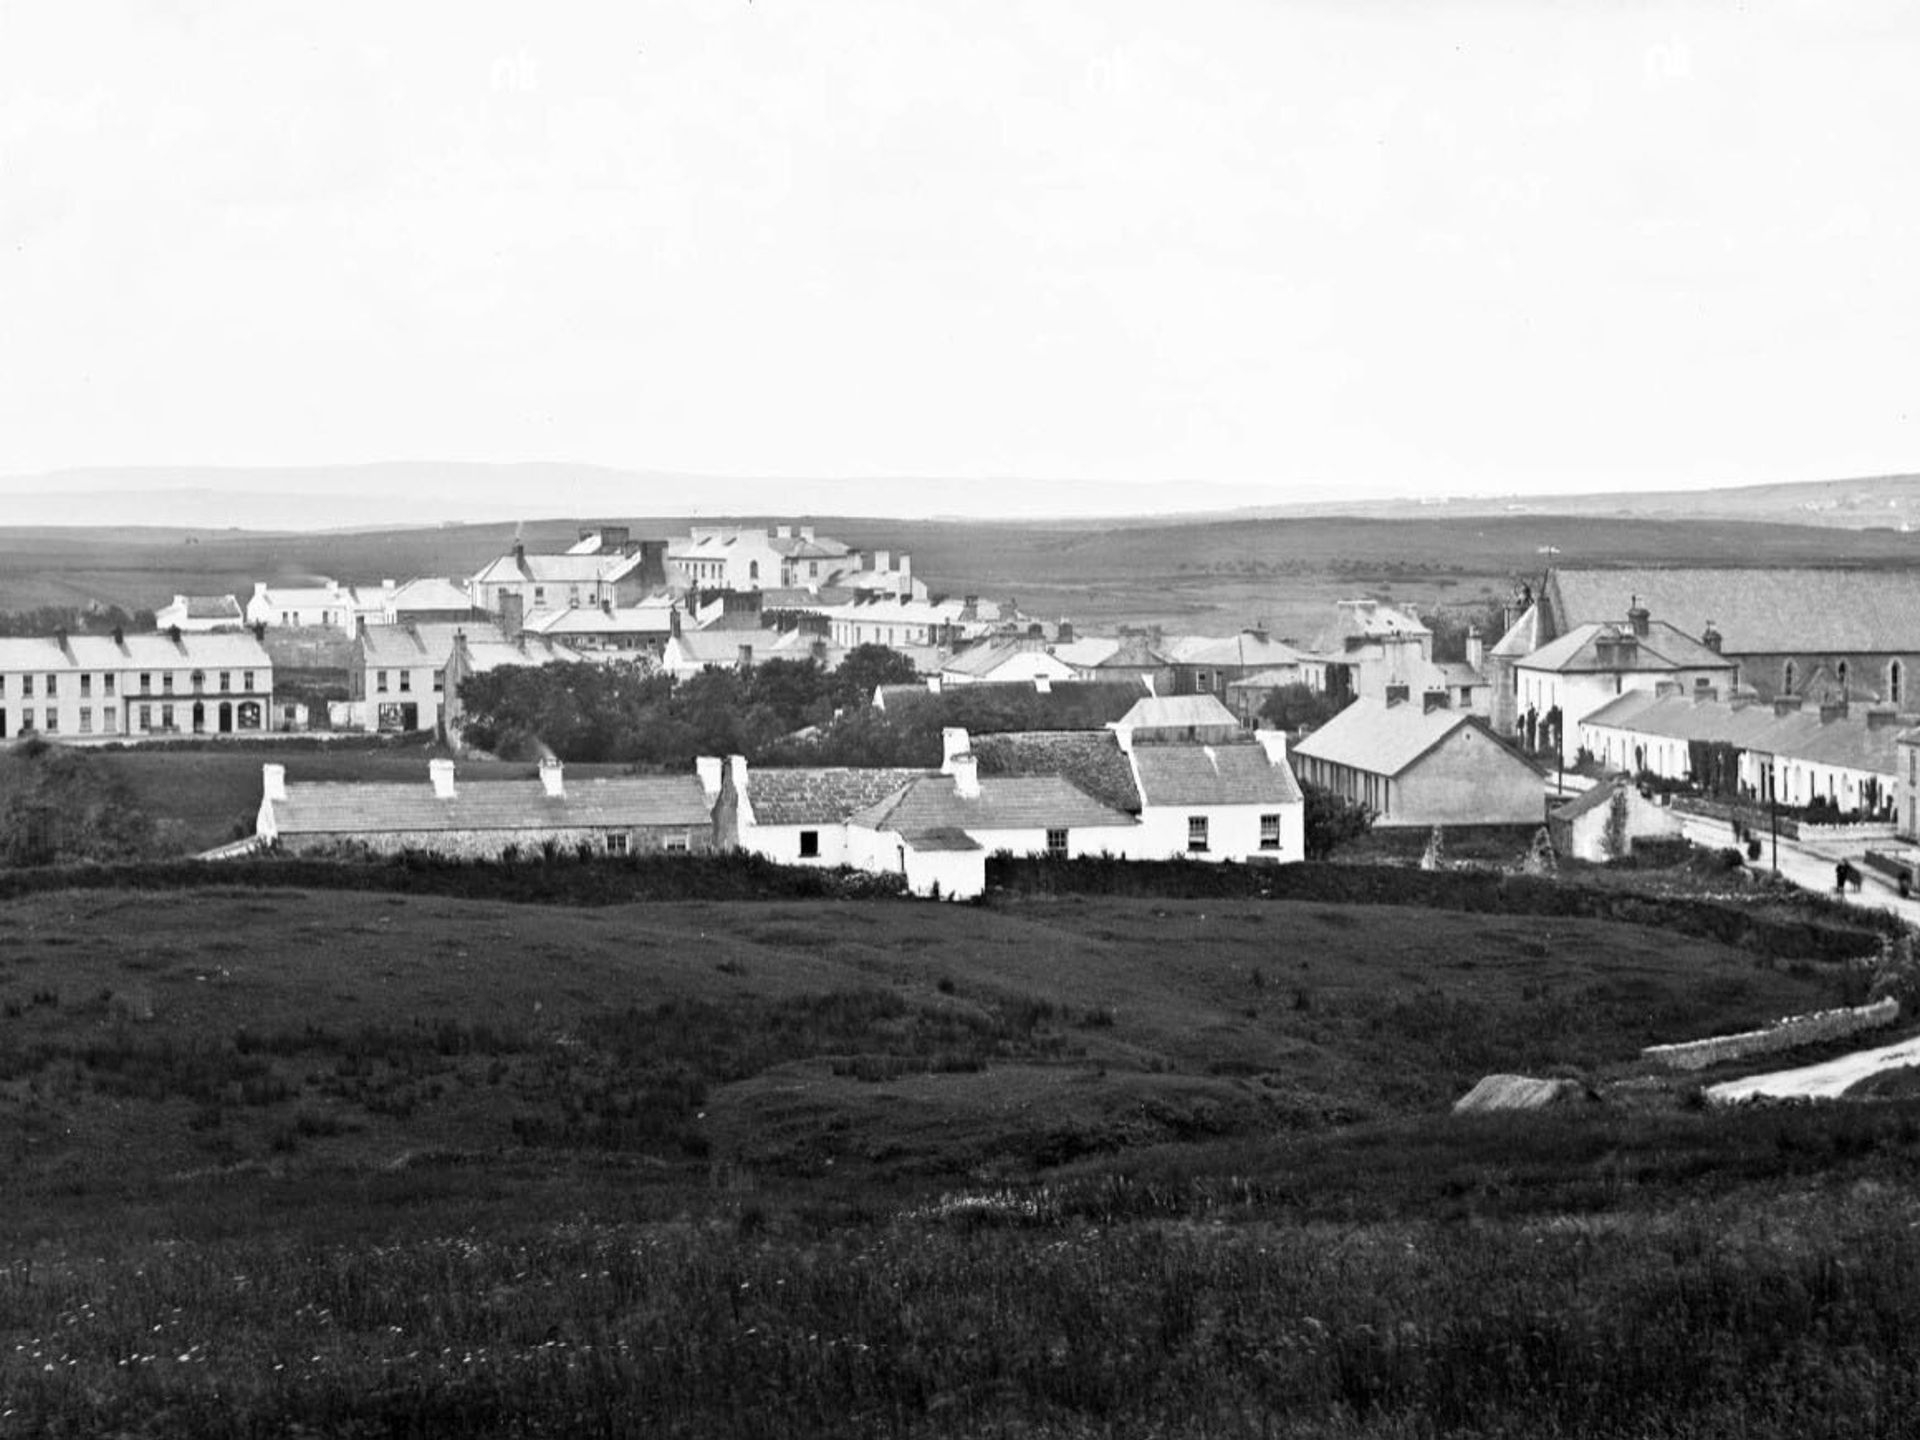 In the second half of the 19th century Lisdoonvarna began to be established.